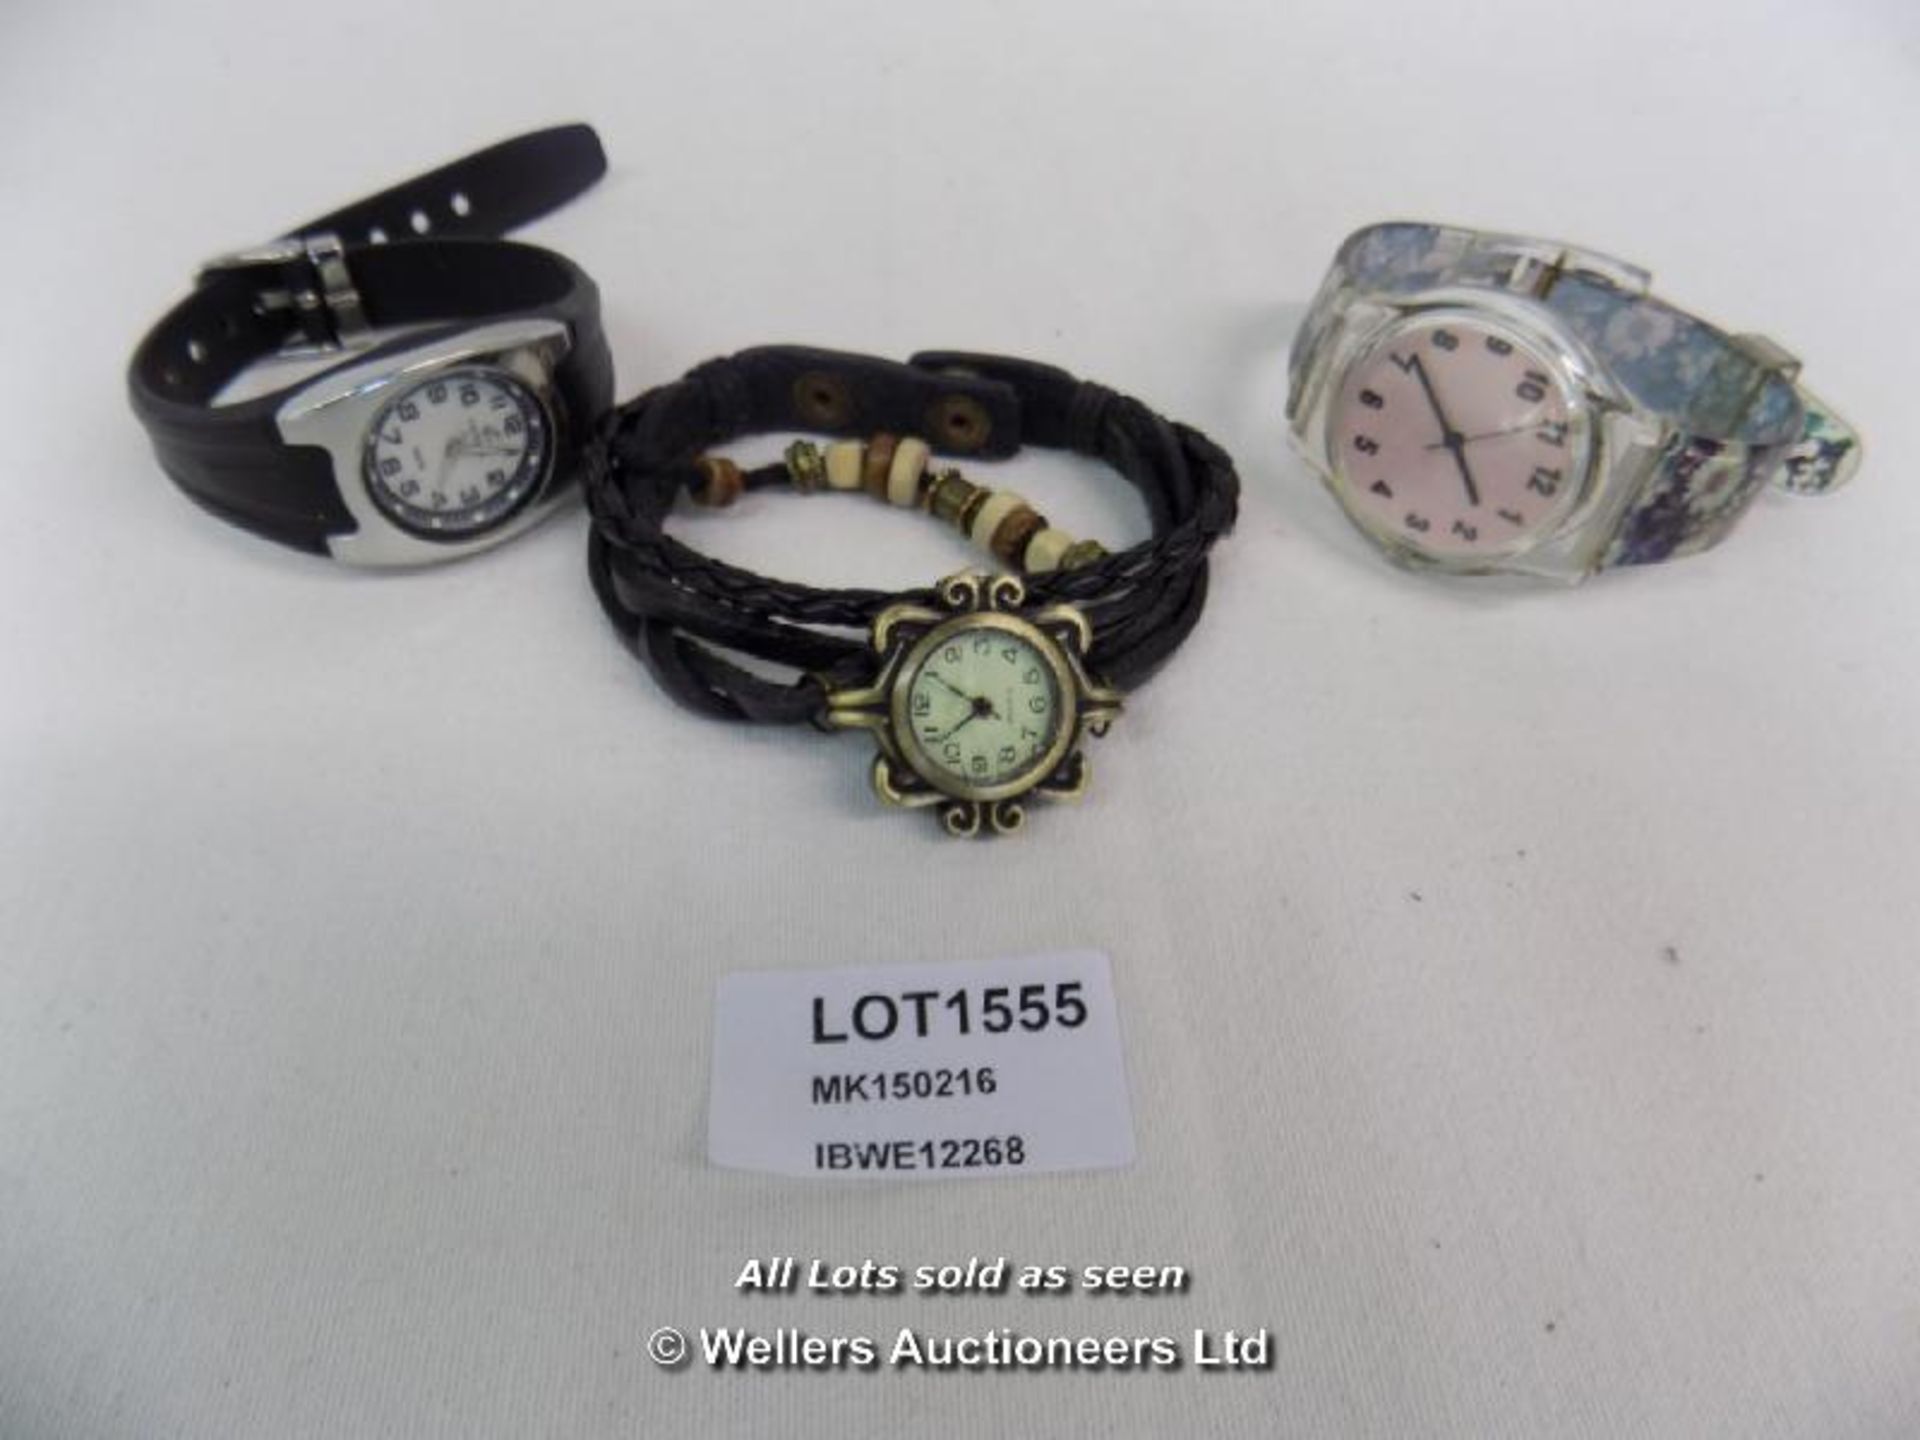 1 X BAG 3 X WATCHES INCLUDING CALYPSO / GRADE: UNCLAIMED PROPERTY / UNBOXED (DC1) {MK150216}